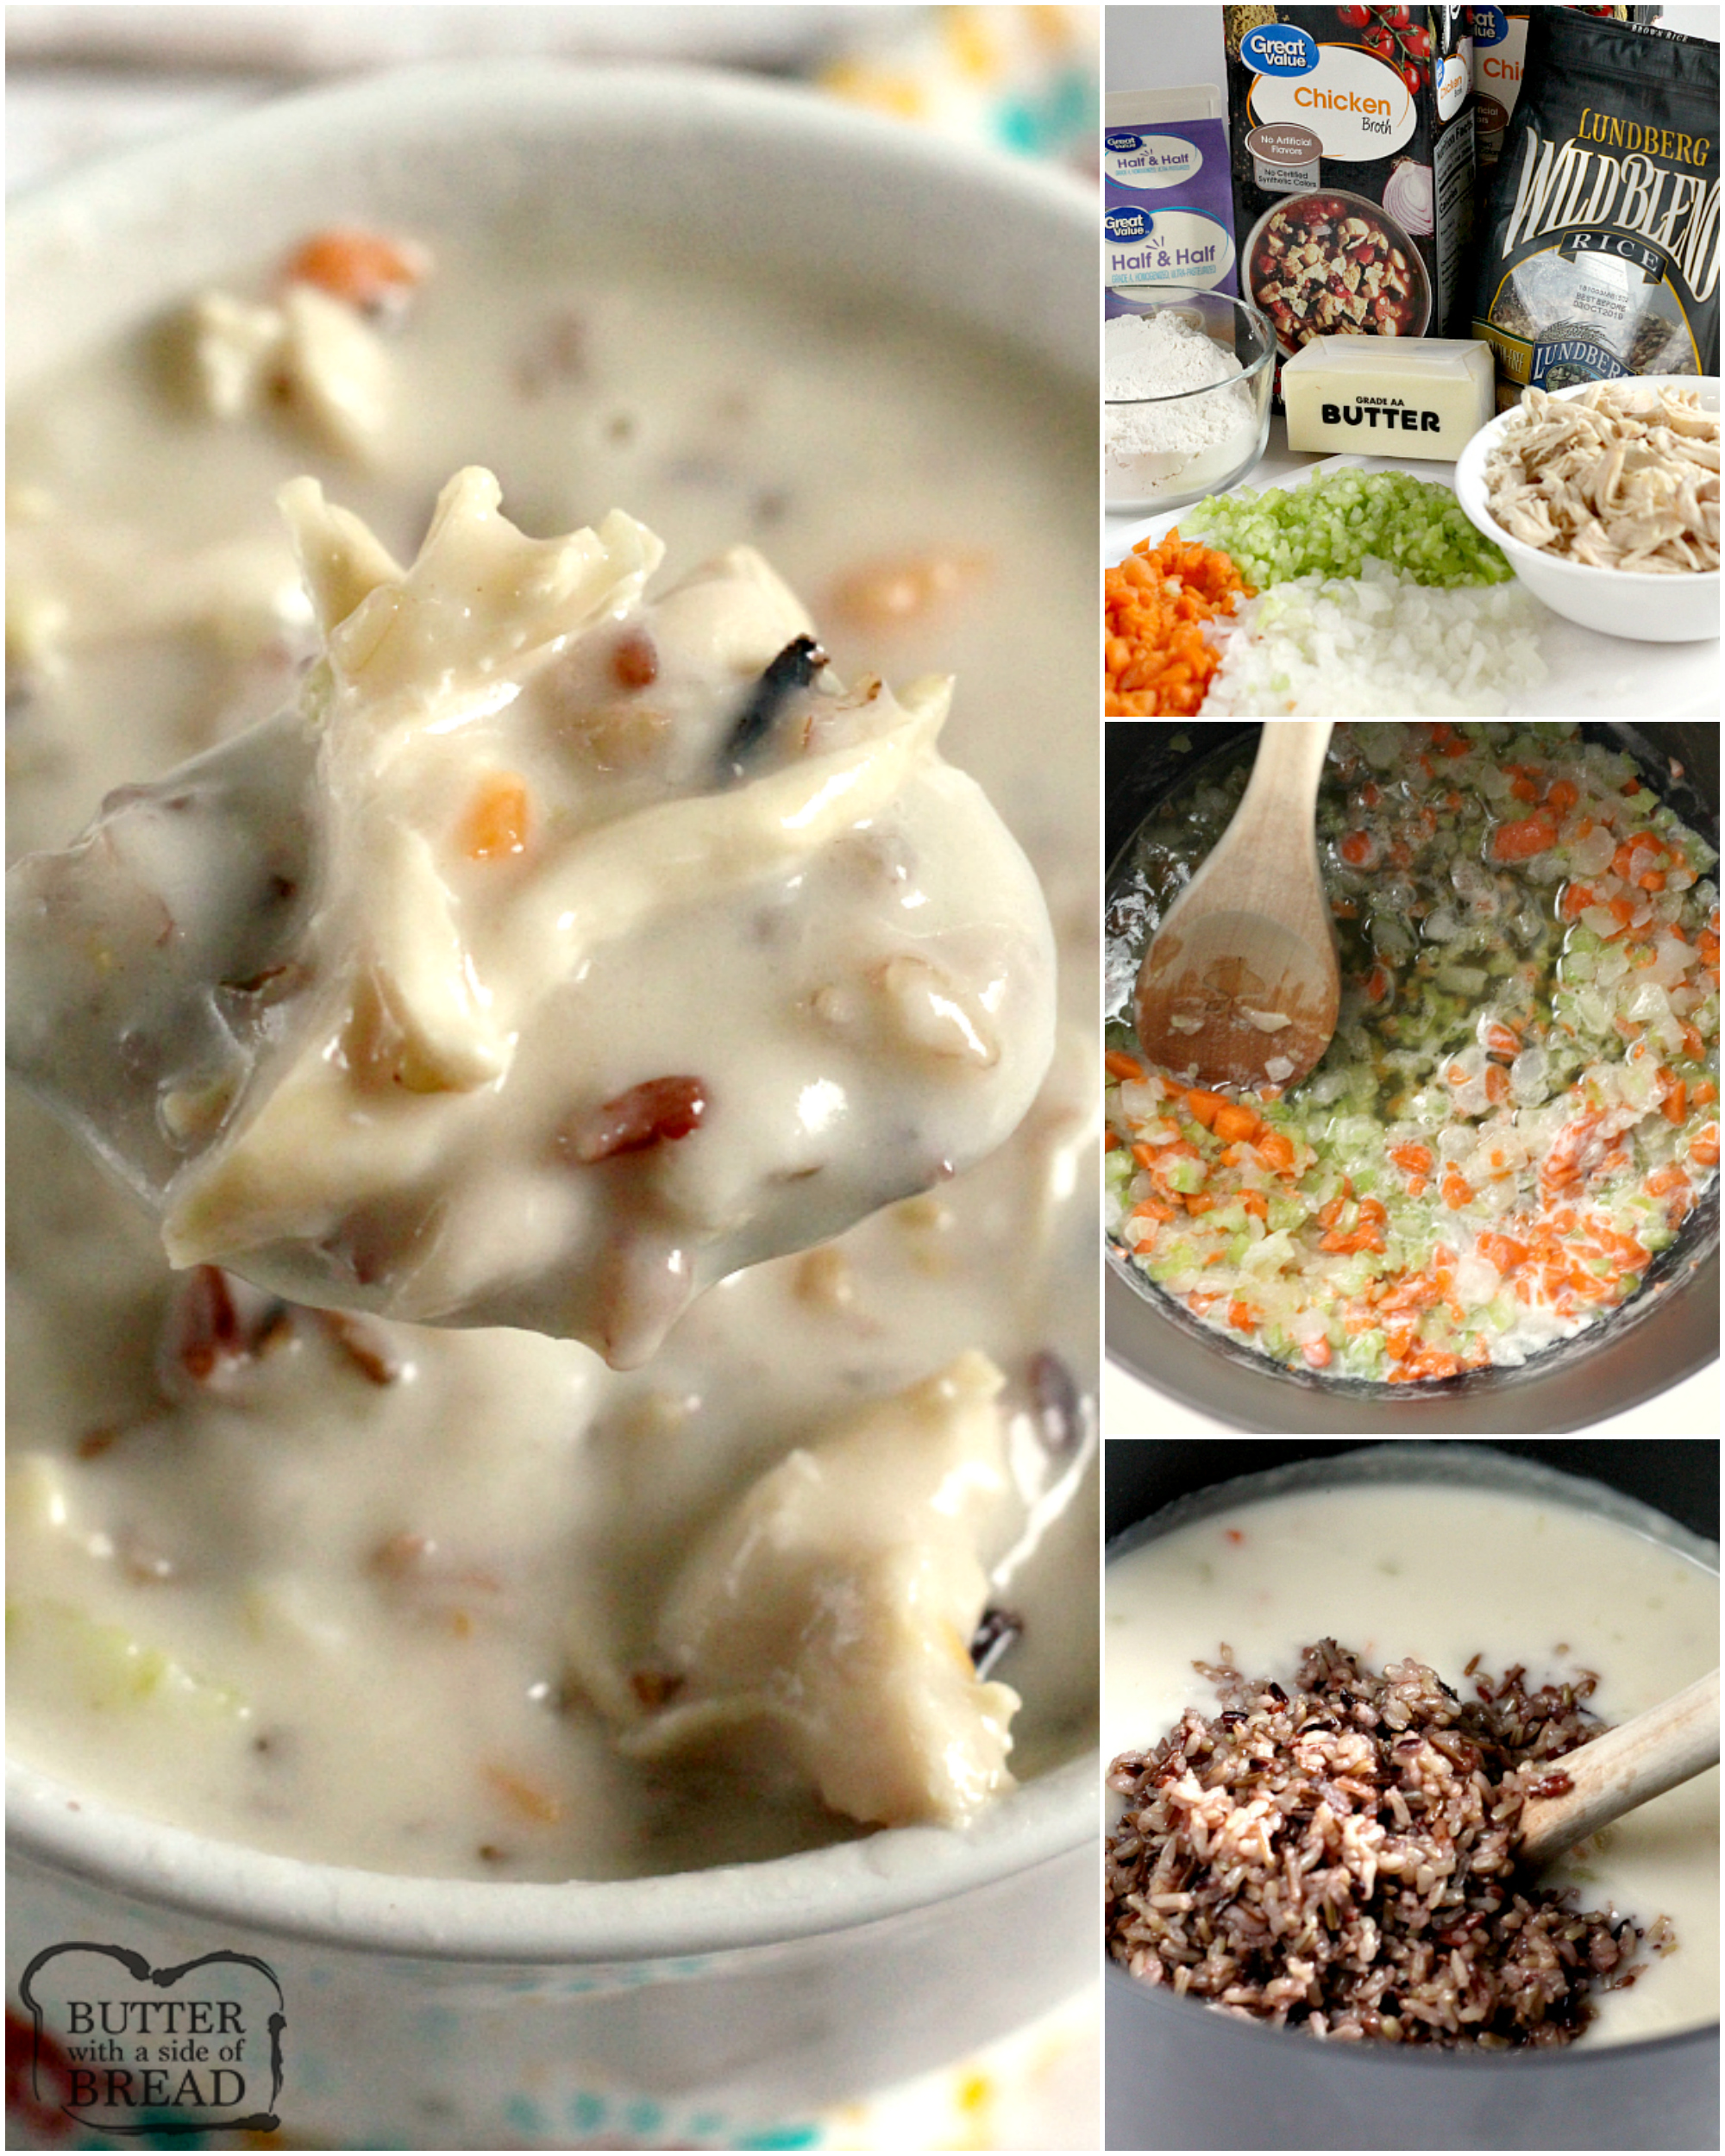 Creamy Chicken Wild Rice Soup is a simple, broth based soup recipe full of chicken, wild rice, vegetables and cream. This hearty and delicious soup is a family favorite!